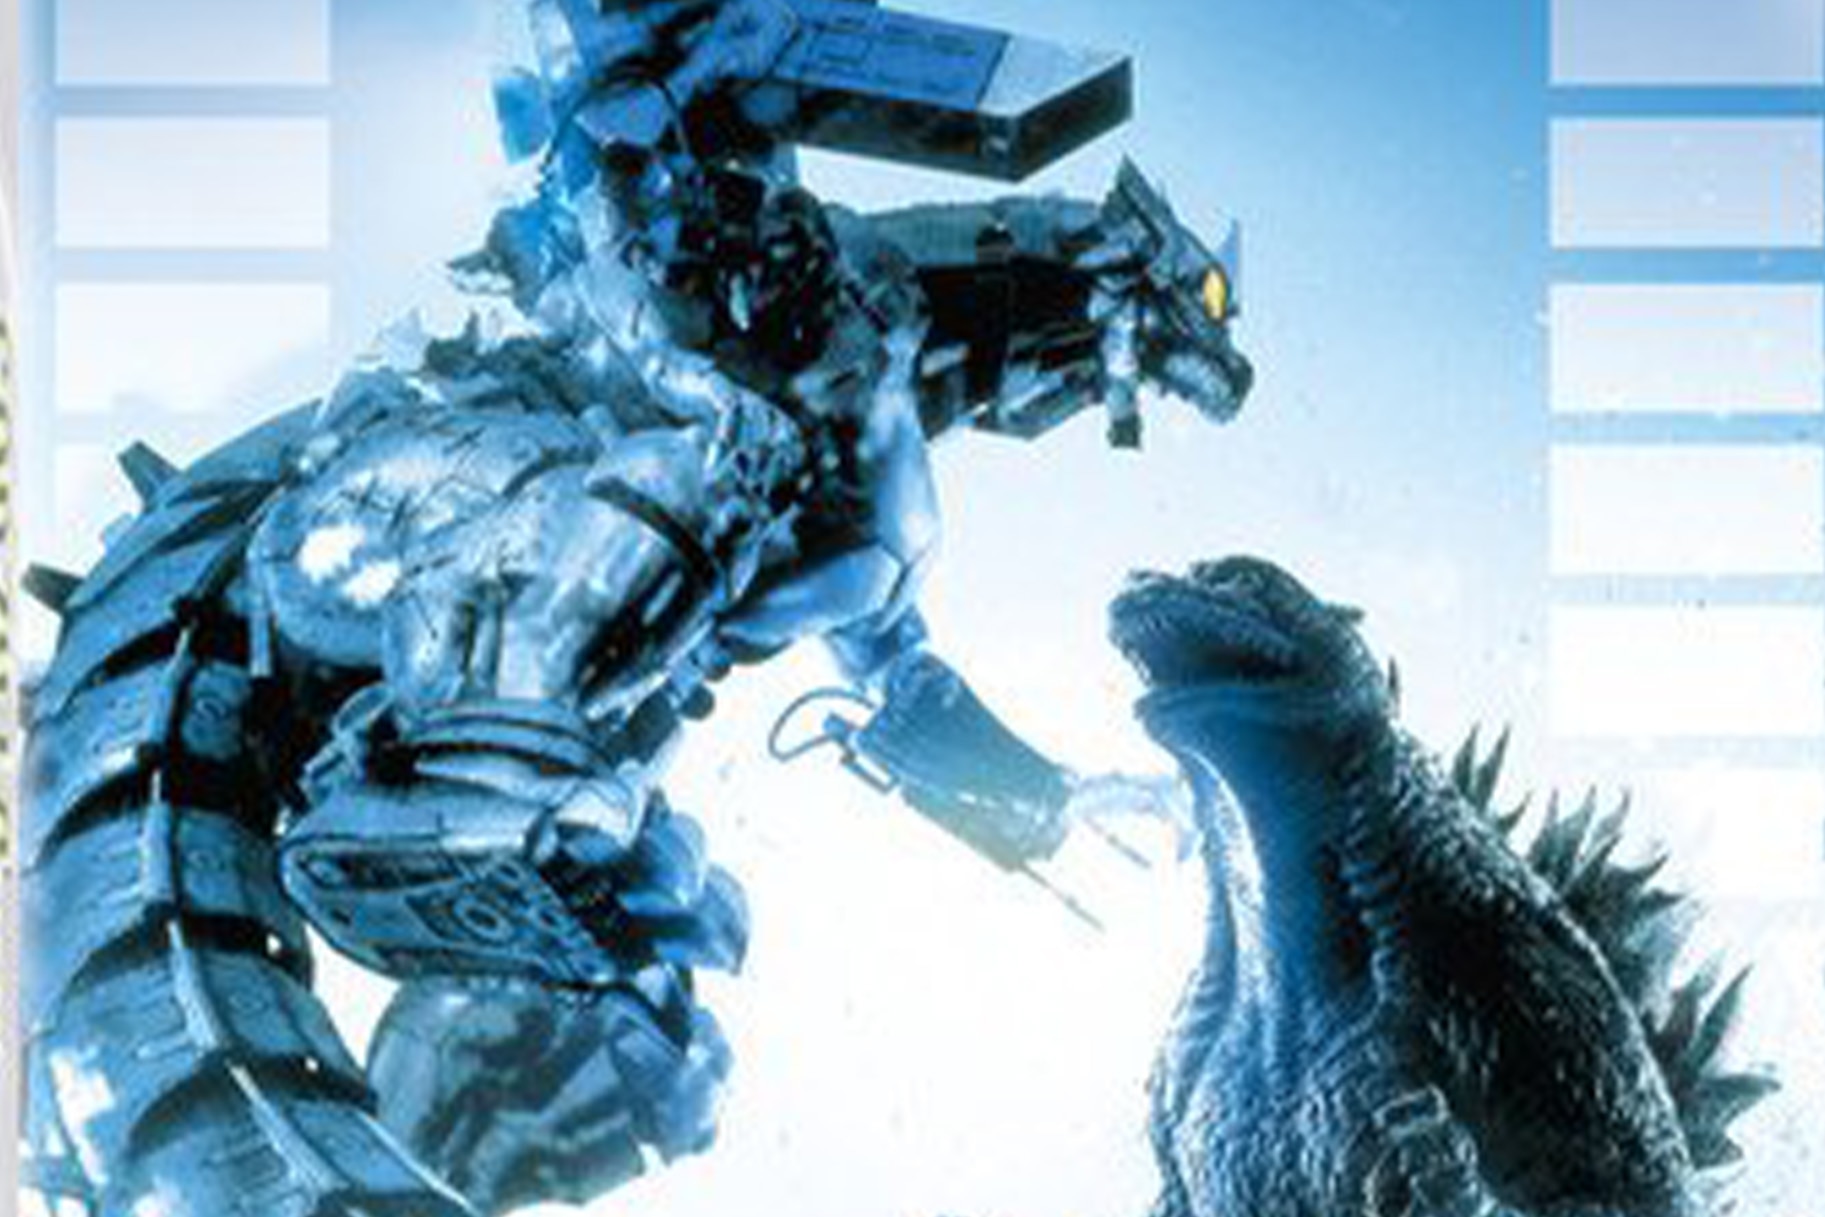 Exclusive: ’Godzilla Against Mechagodzilla’ roaring to U.S. theaters for first time ever